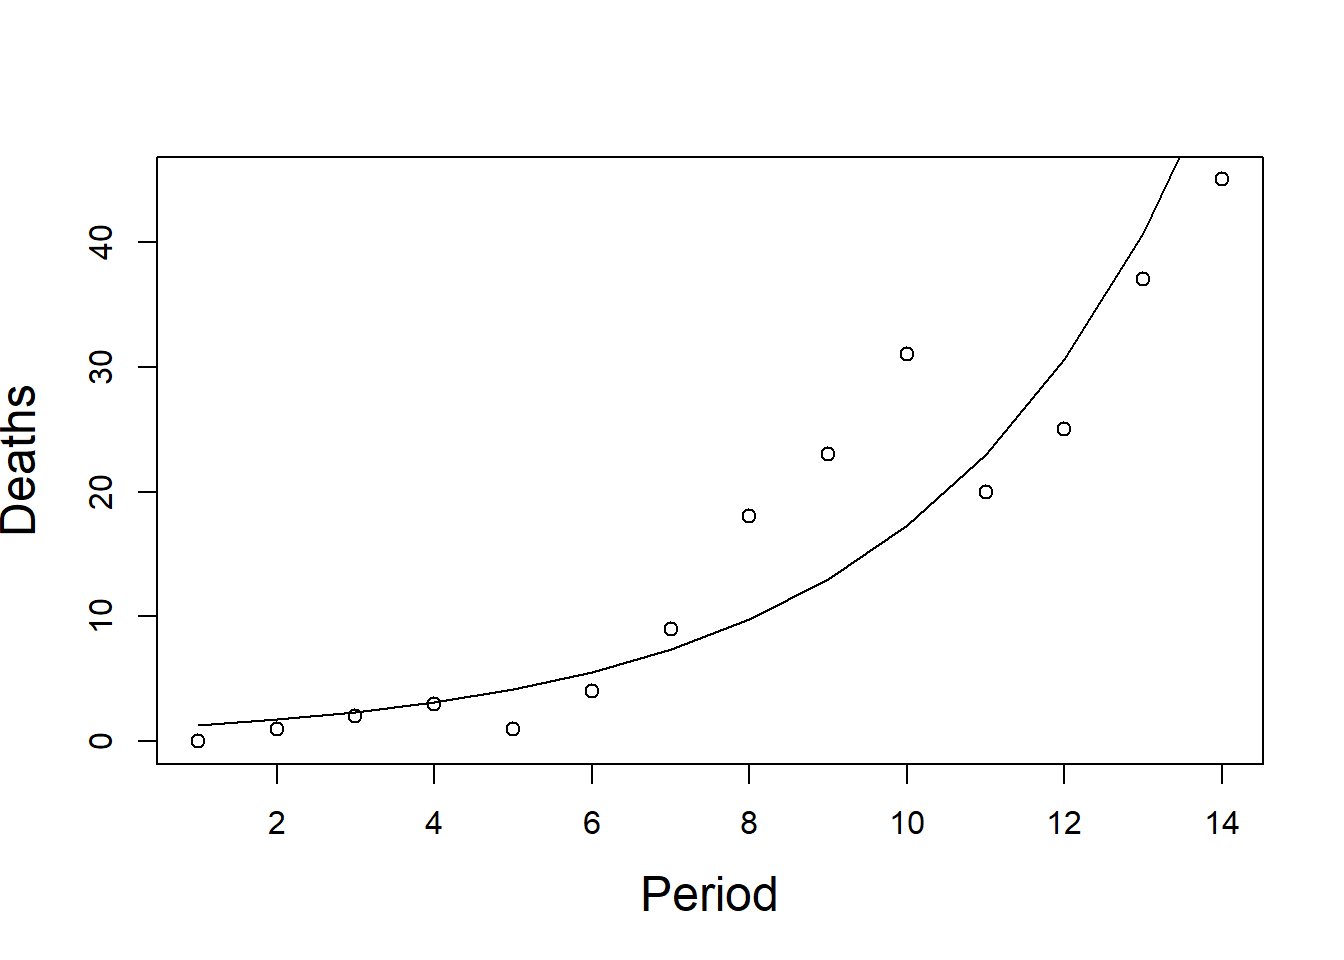 Numbers of deaths from AIDS in Australia per quarter from 1983 to 1986.  Line shows $e^{0.285t}$, the generalised linear model with Poisson errors.